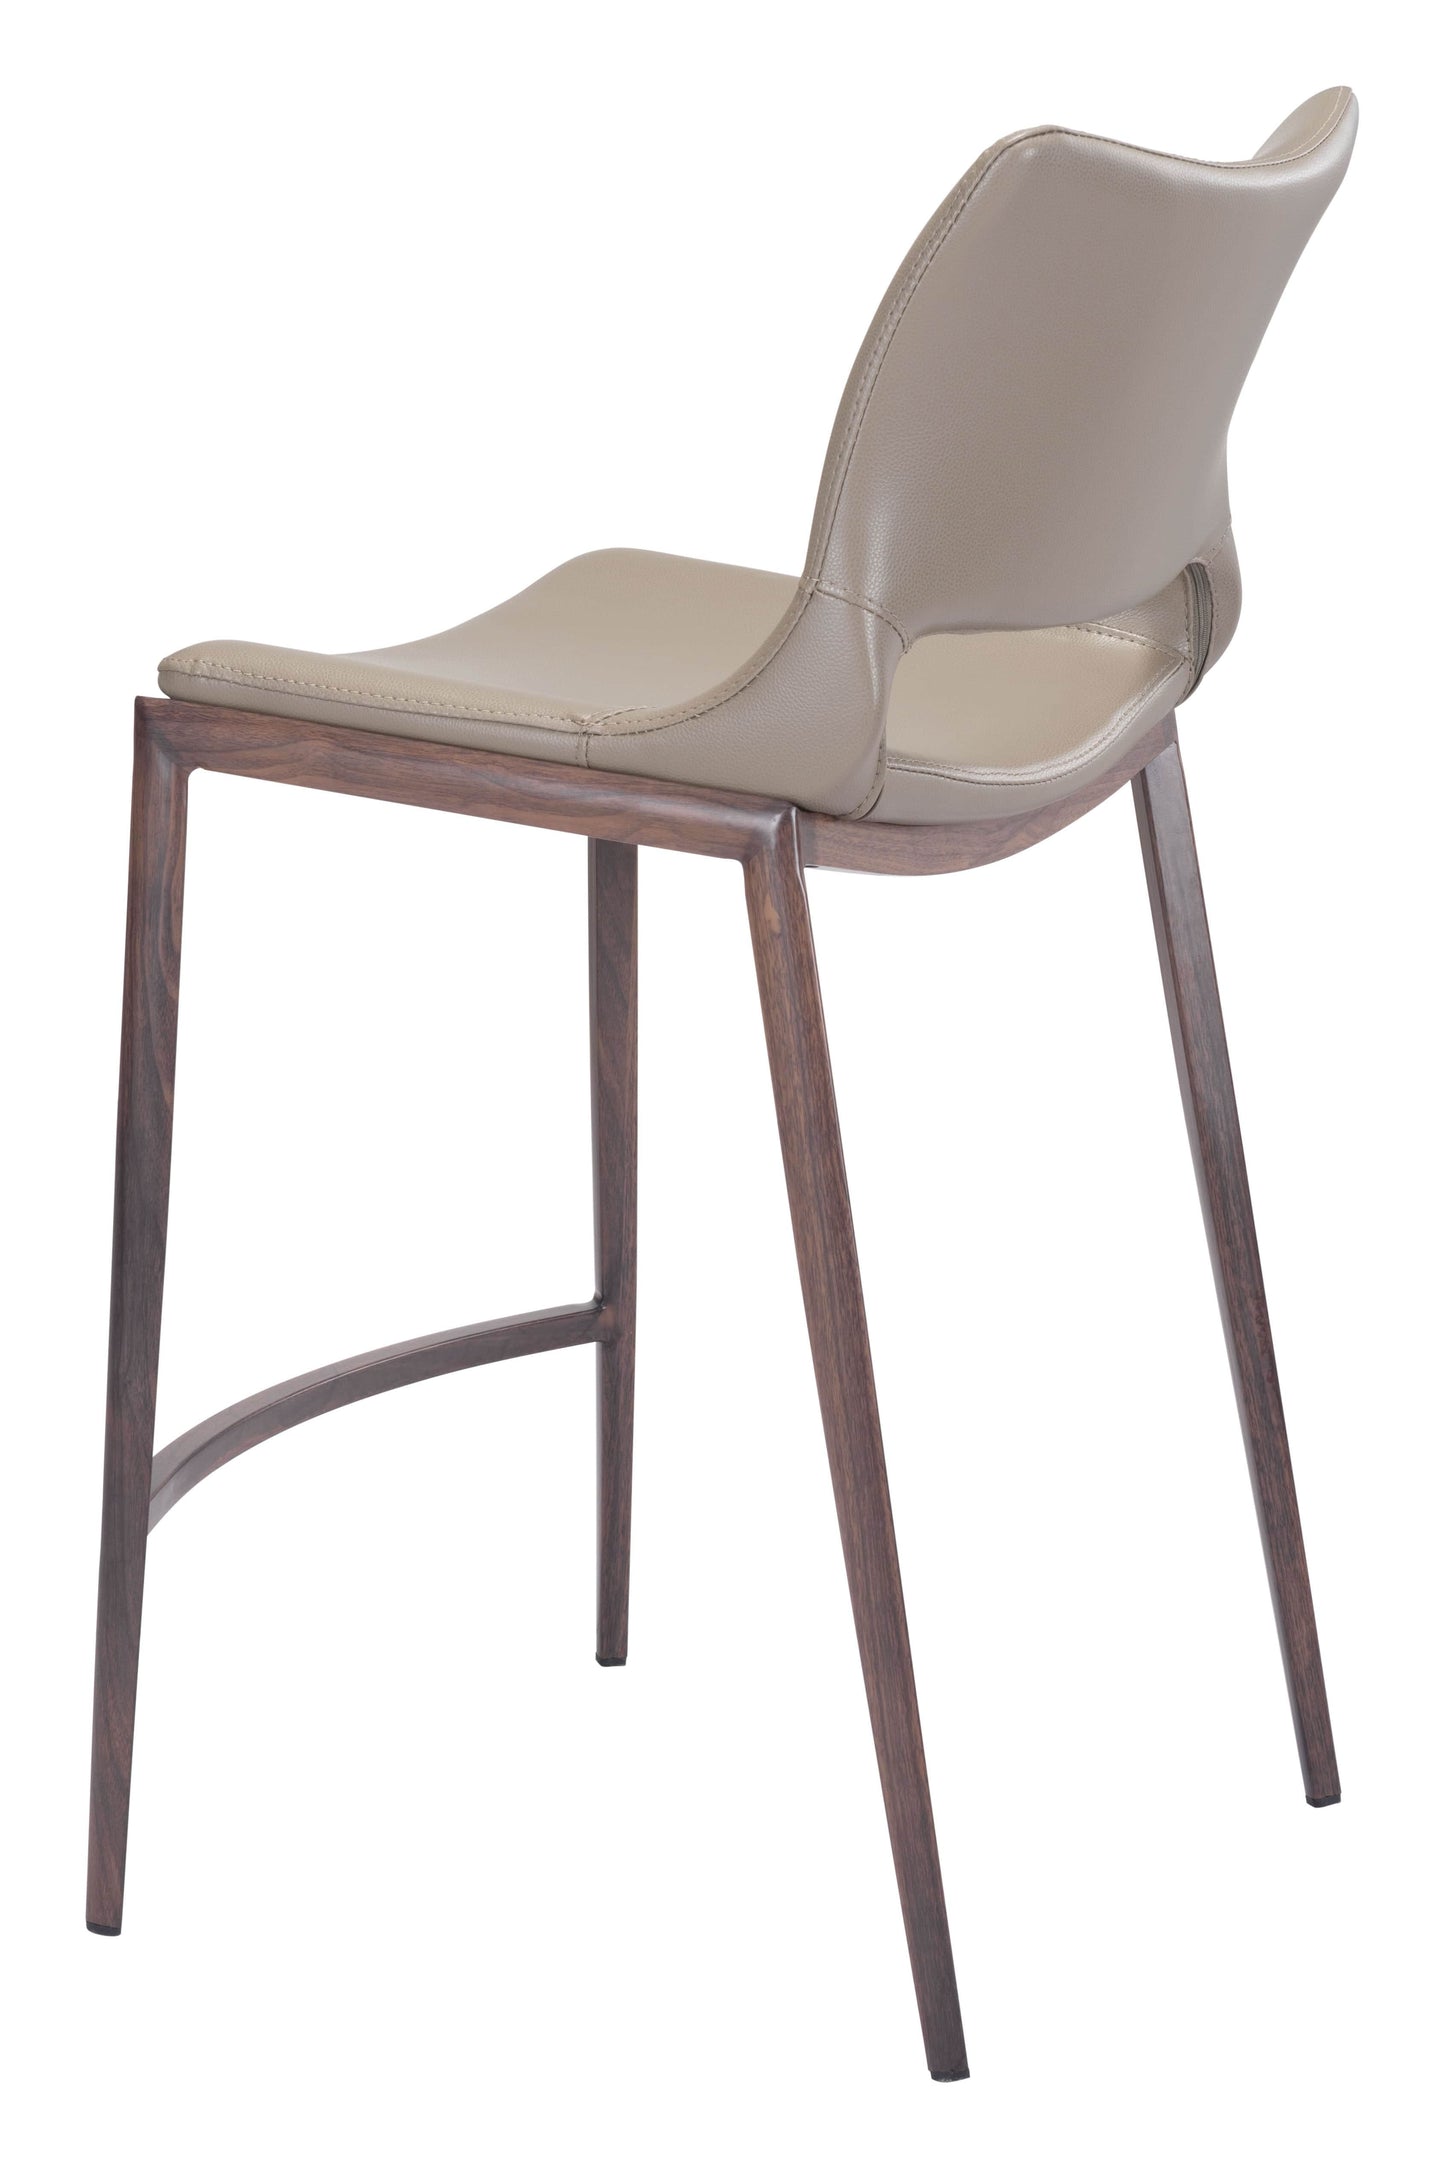 Ergonomic chair in a modern style